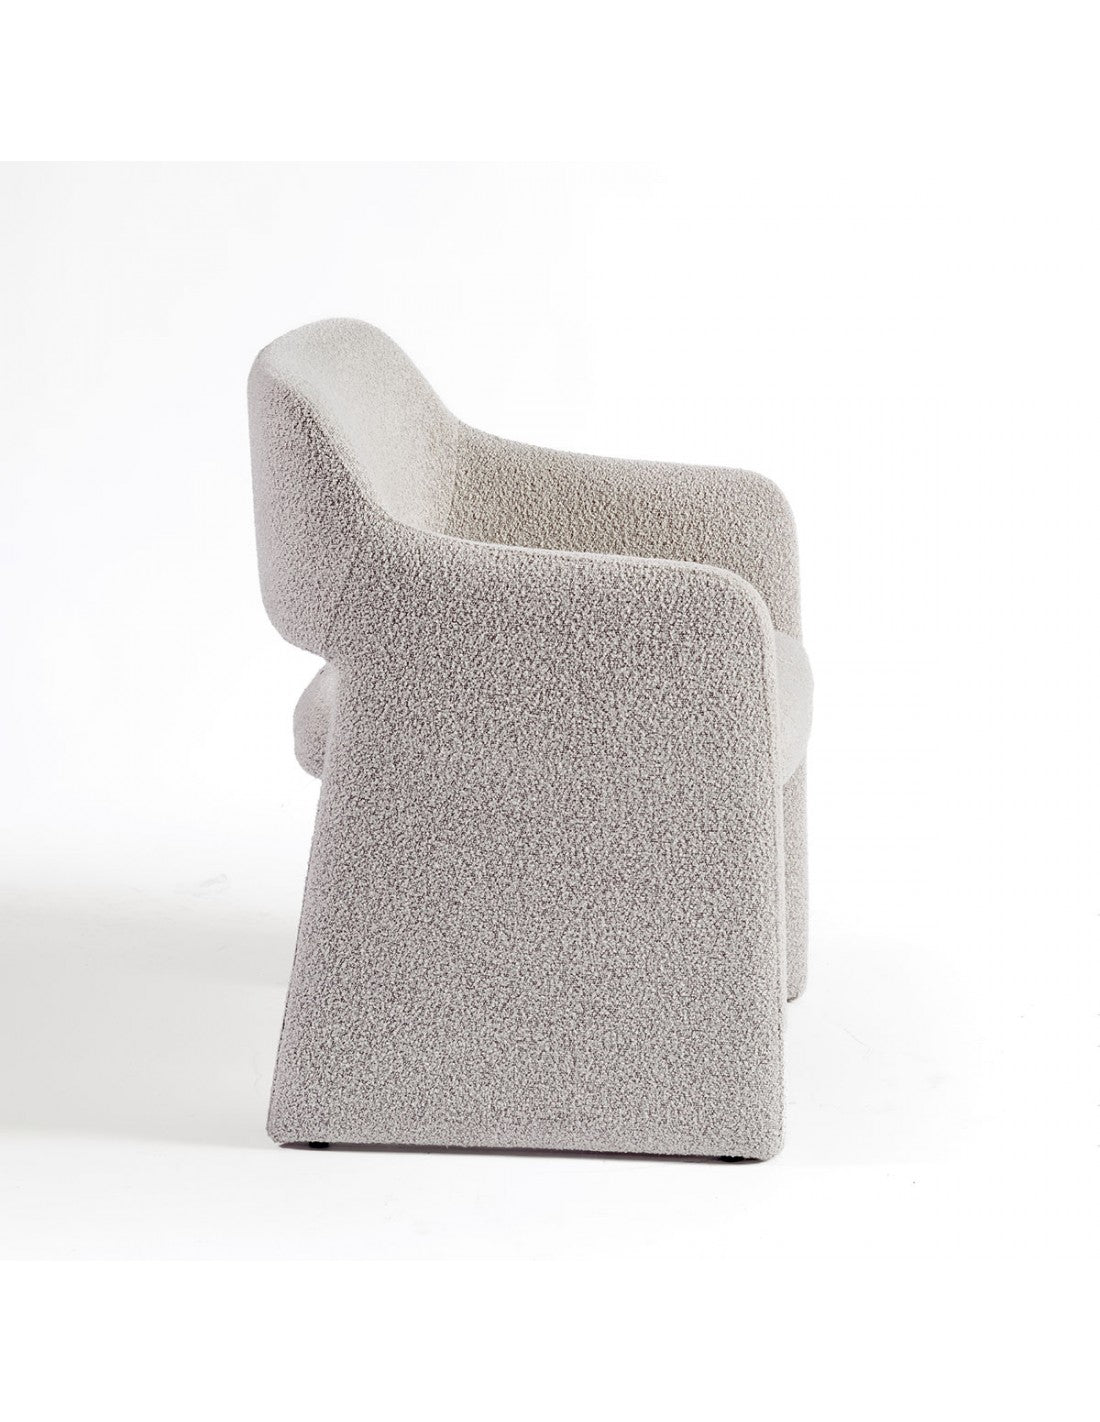 Gray bouclé upholstered dining chair